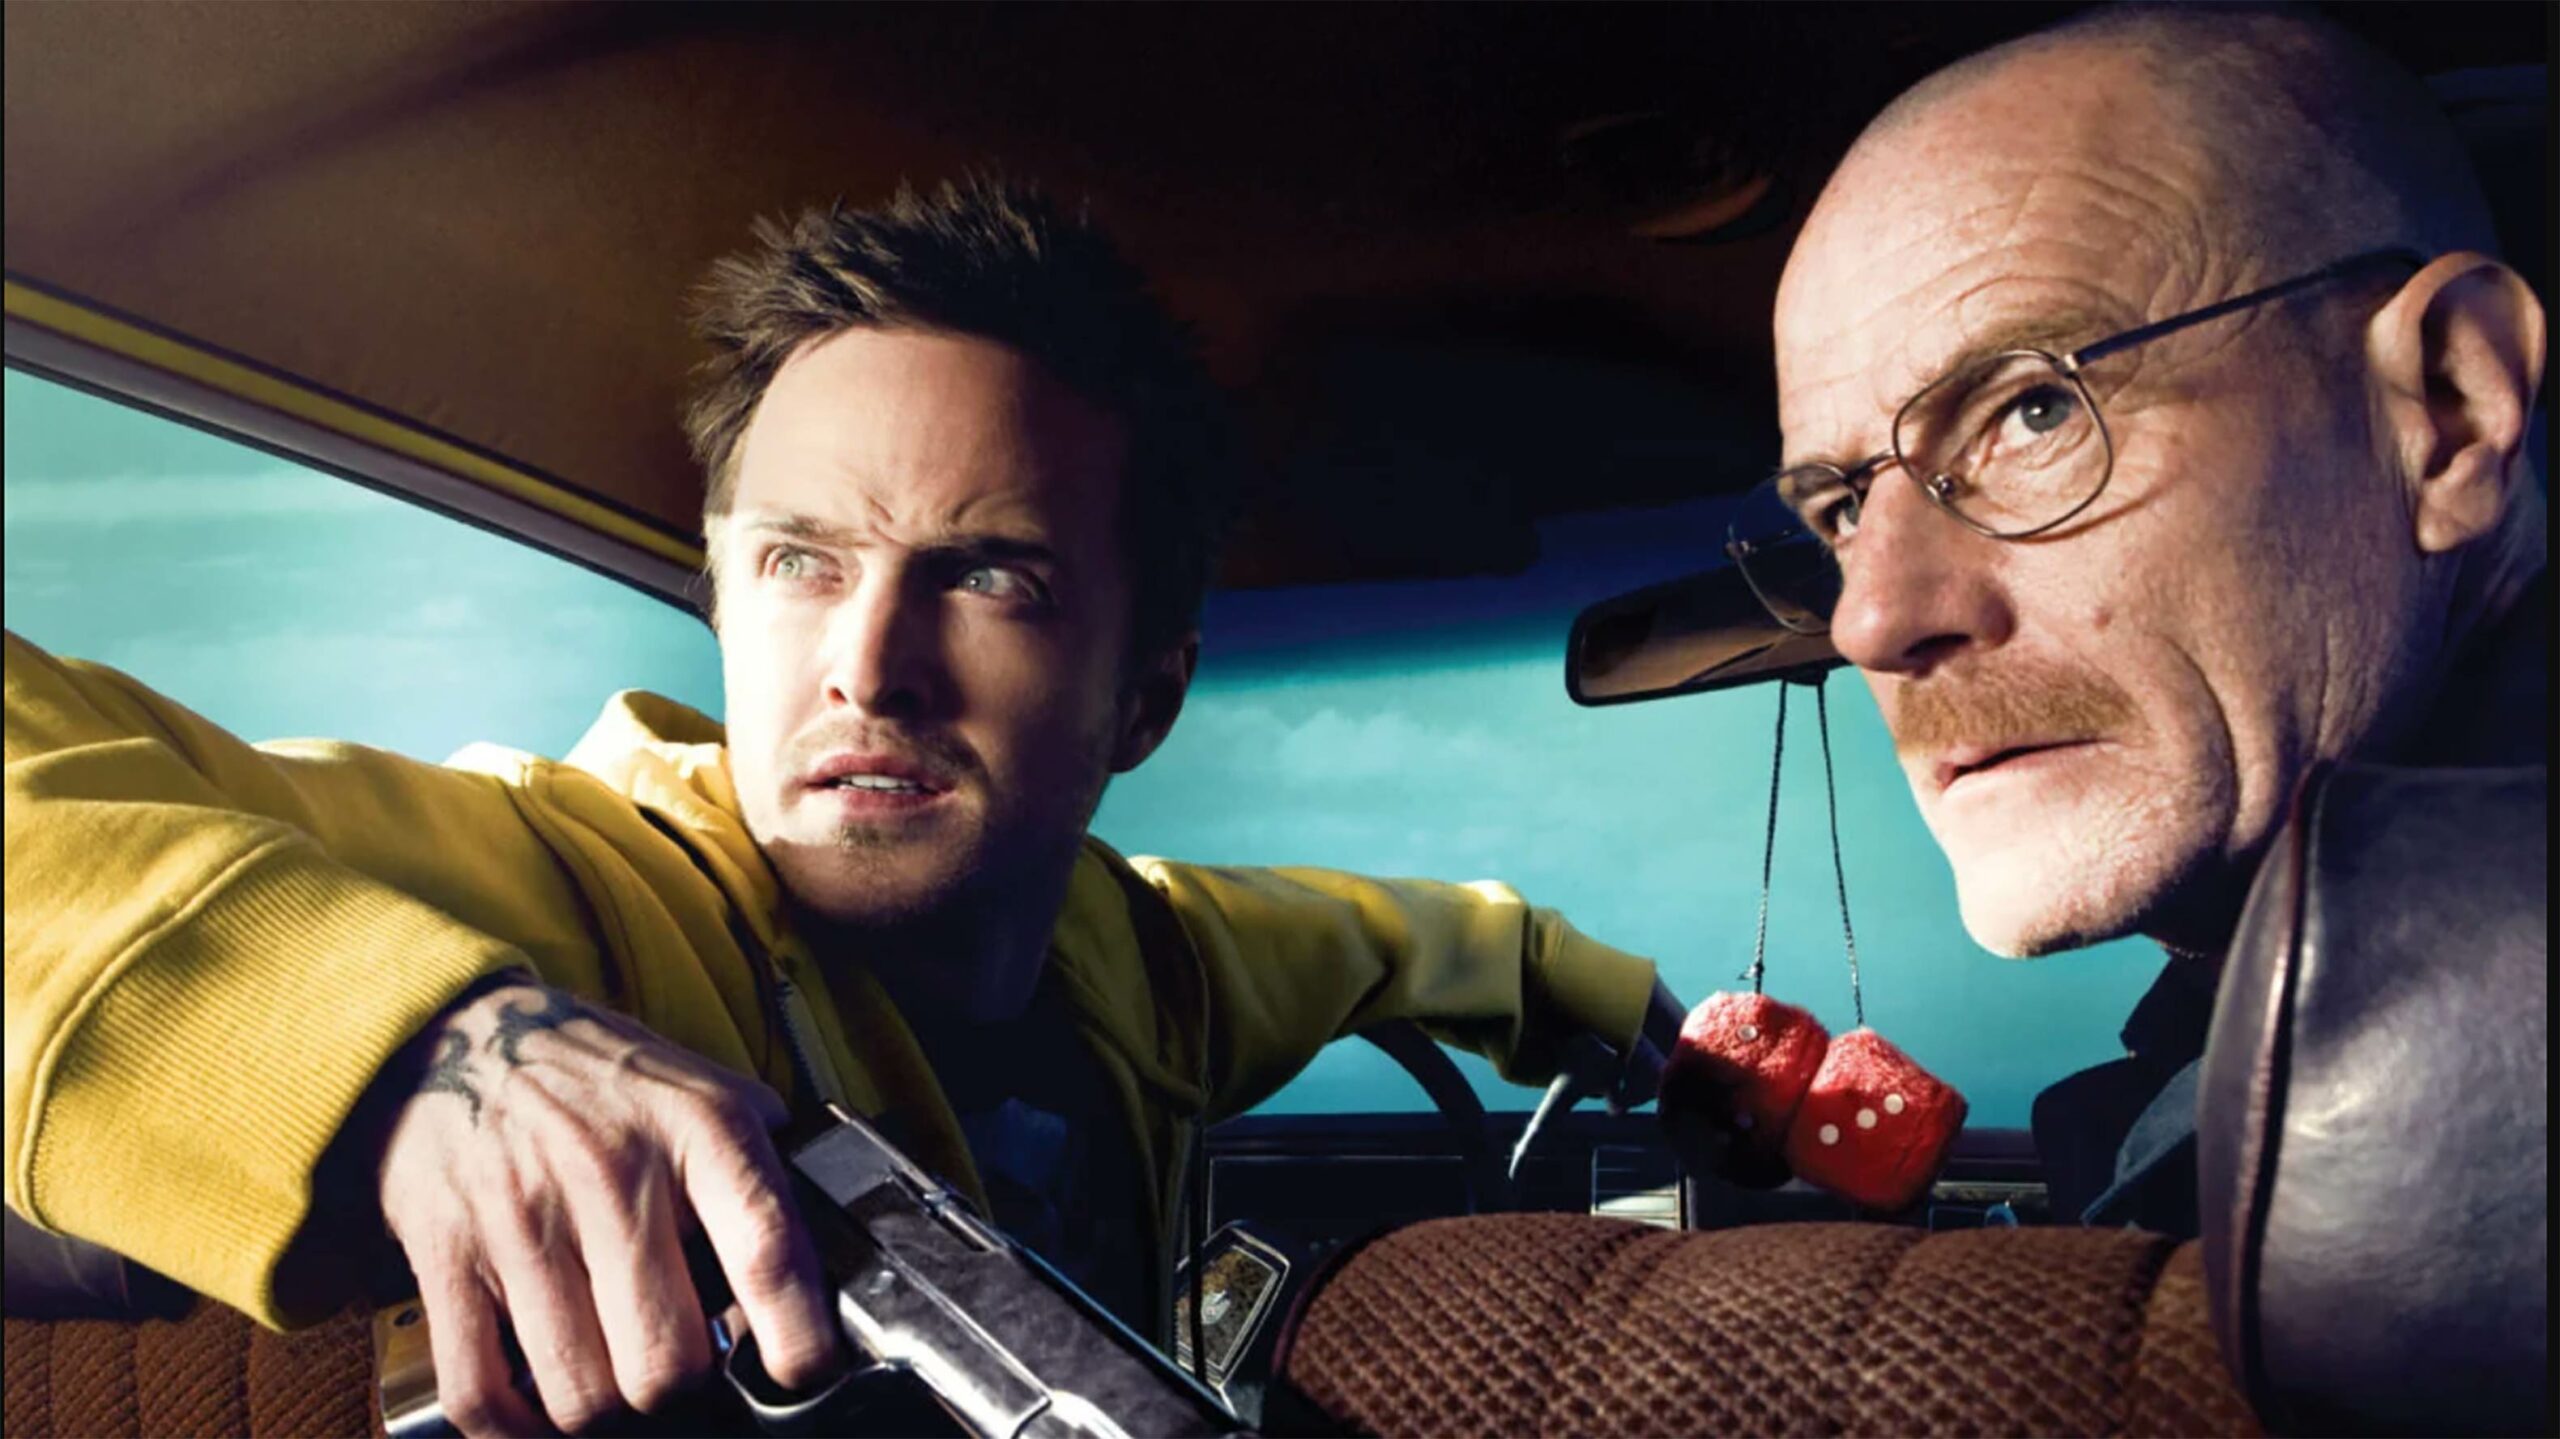 Walter White and Jesse Pinkman in car